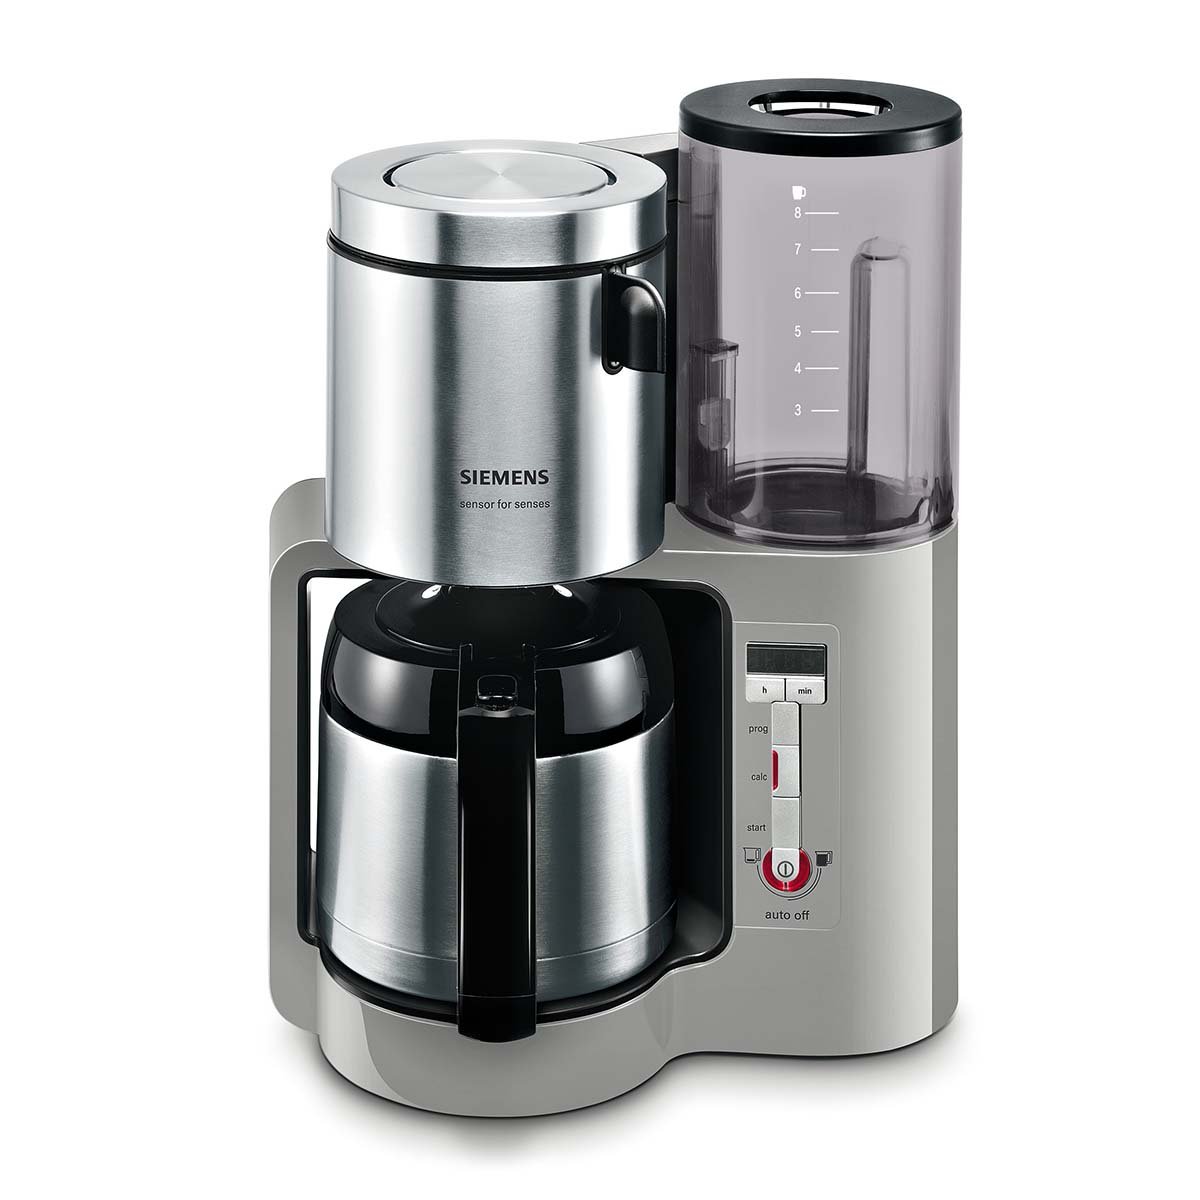 Siemens Tc86505 1100 Watt Max, 8/12 Cup Coffee Maker With Stainless Steel T